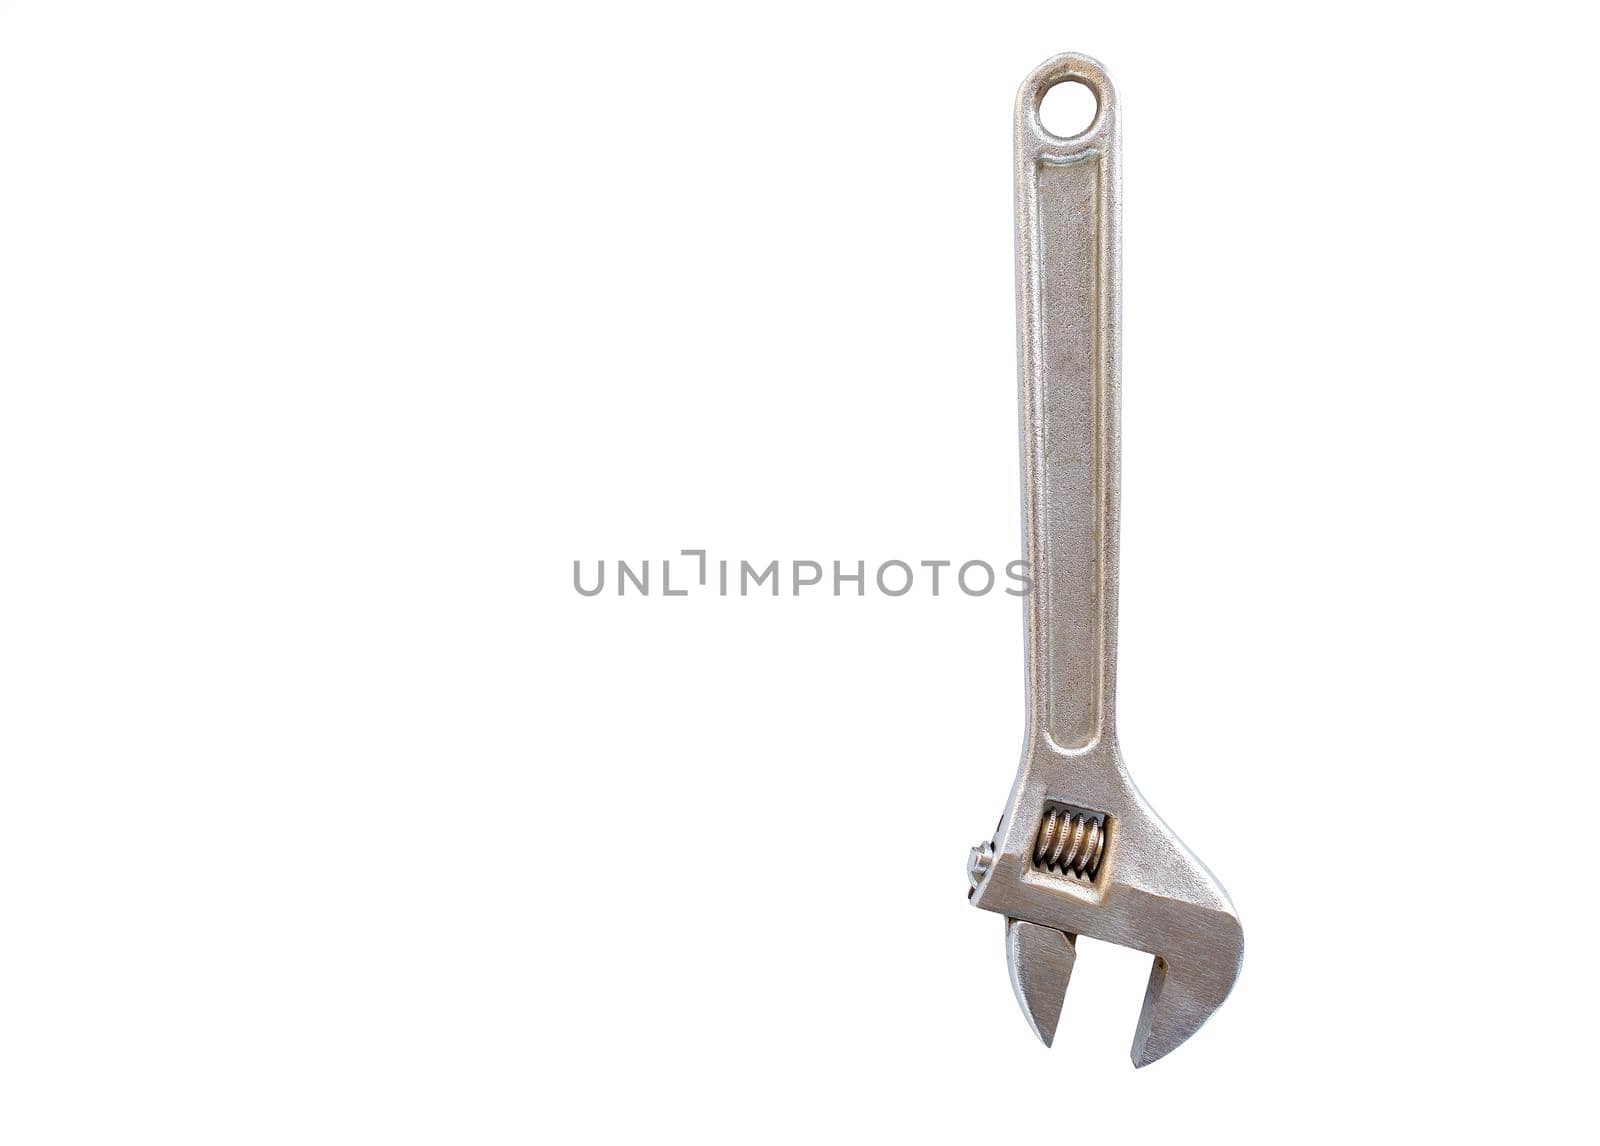 An old metal chrome adjustable wrench is positioned vertically and isolated on a white background.